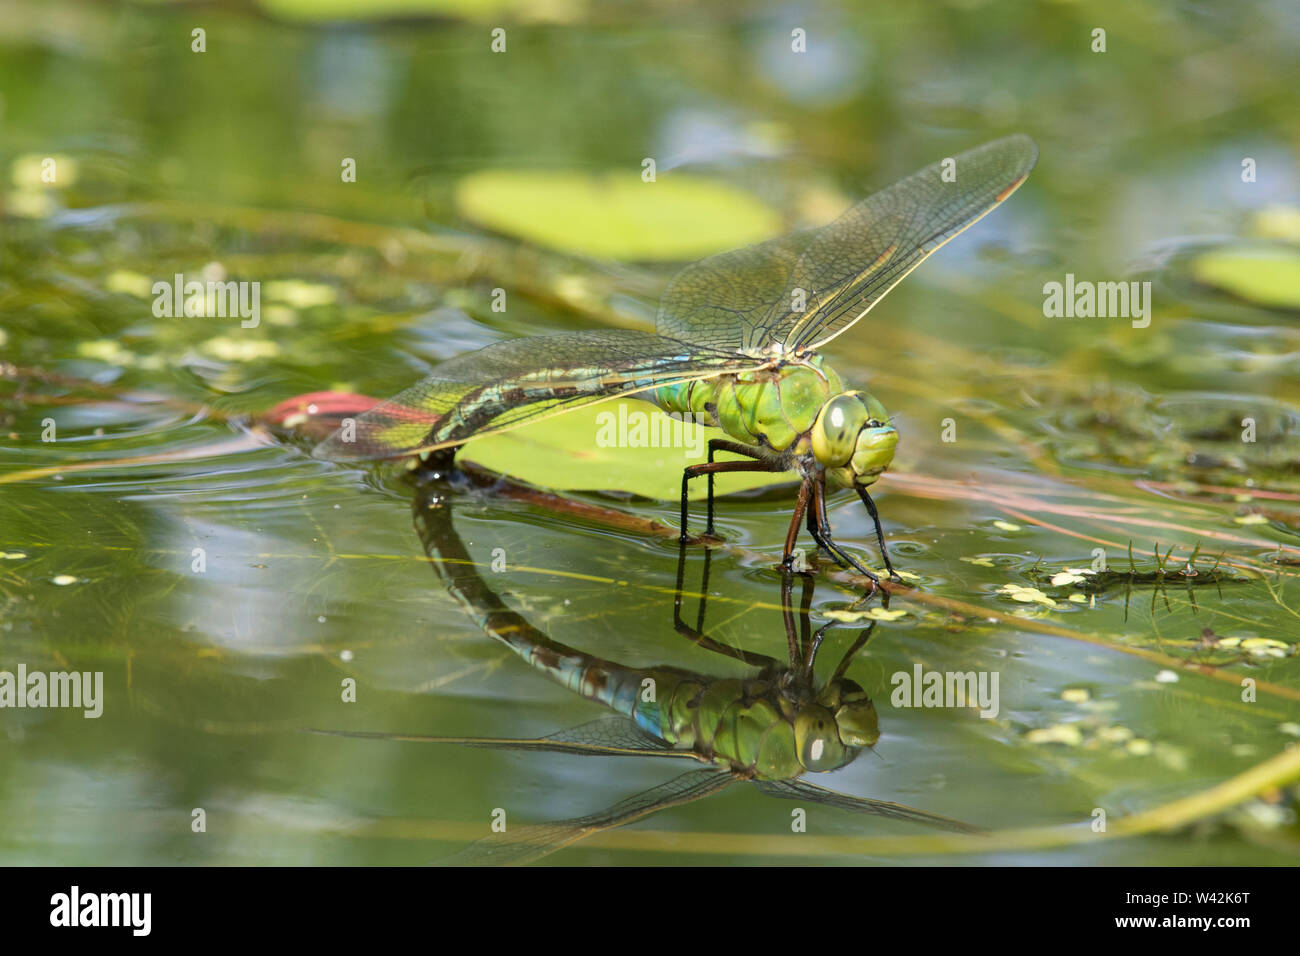 Emperor dragonfly, Anax imperator, laying eggs on Fringed water-lily, Nymphoides peltatum, garden wildlife pond, Sussex, UK, June Stock Photo